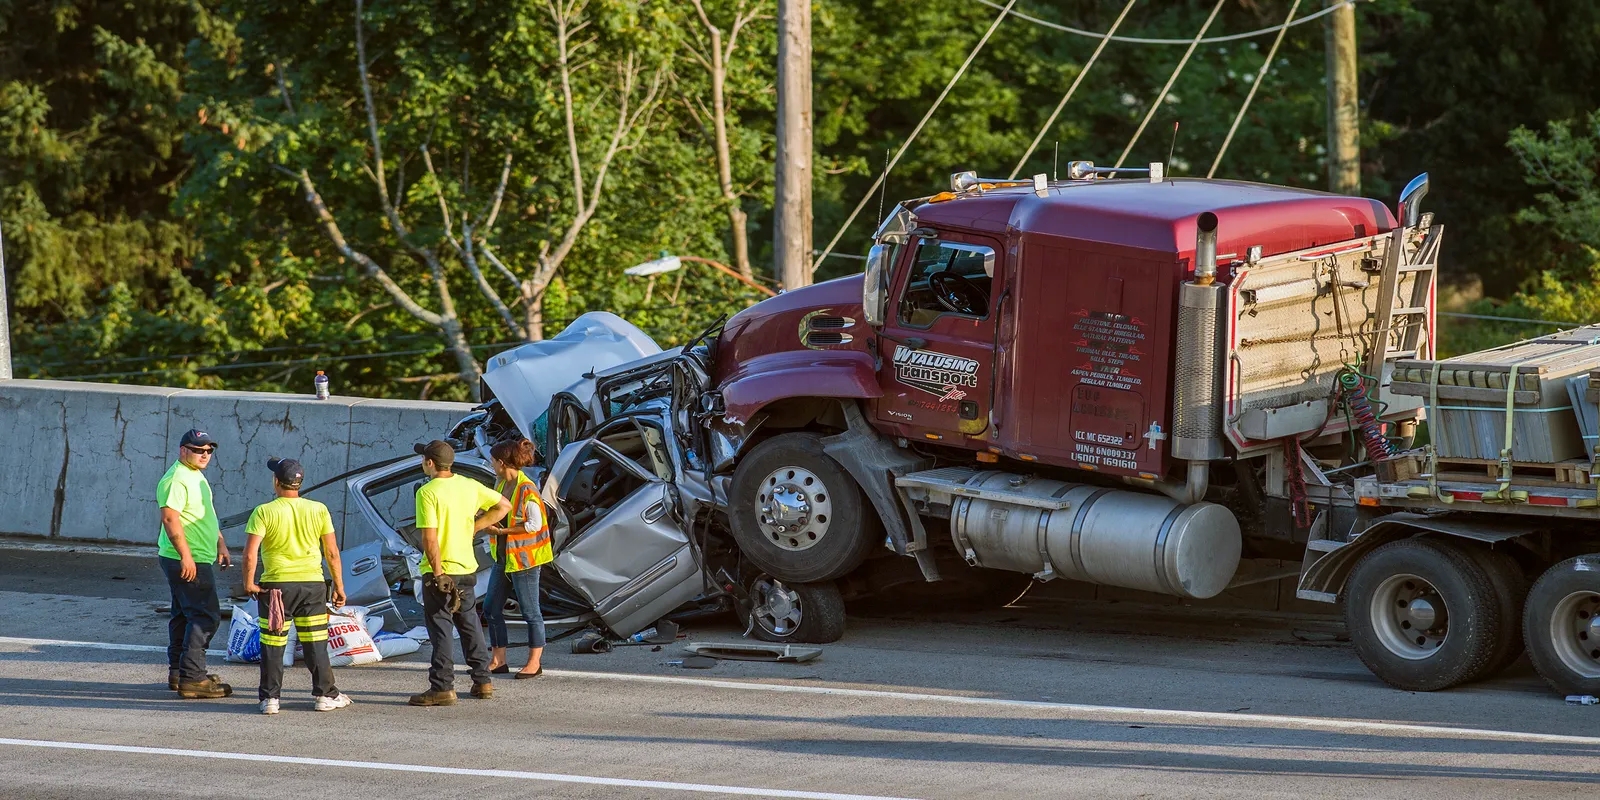 800truckwreck – A Reputable Resource for Obtaining Optimal Compensation in a Trucking Accident post thumbnail image